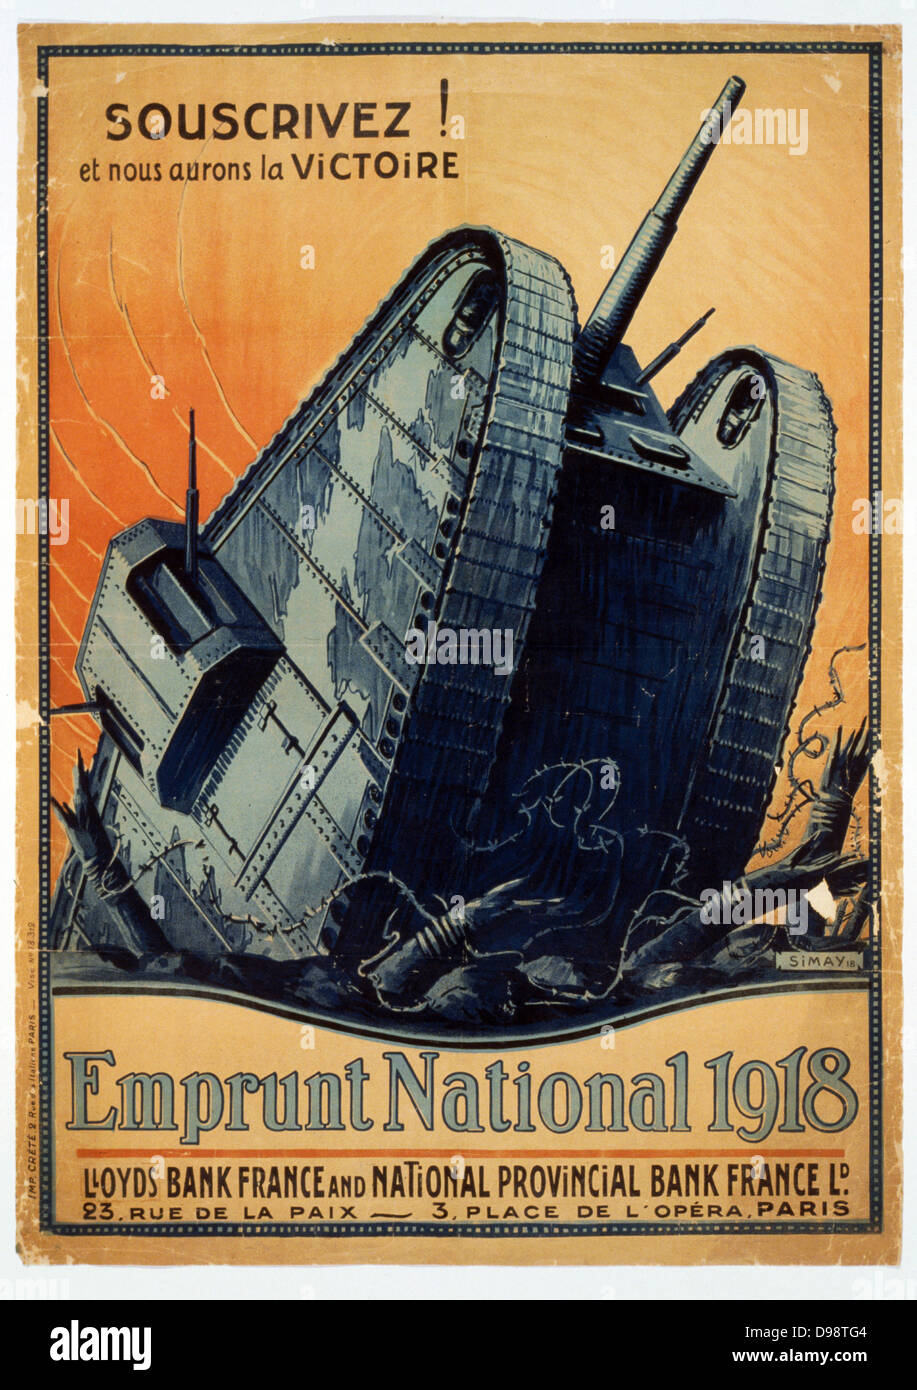 Subscribe! And we shall have Victory. World War I French poster for 1918 Victory Bonds. A tank crashes through barbed wire entanglements. Stock Photo